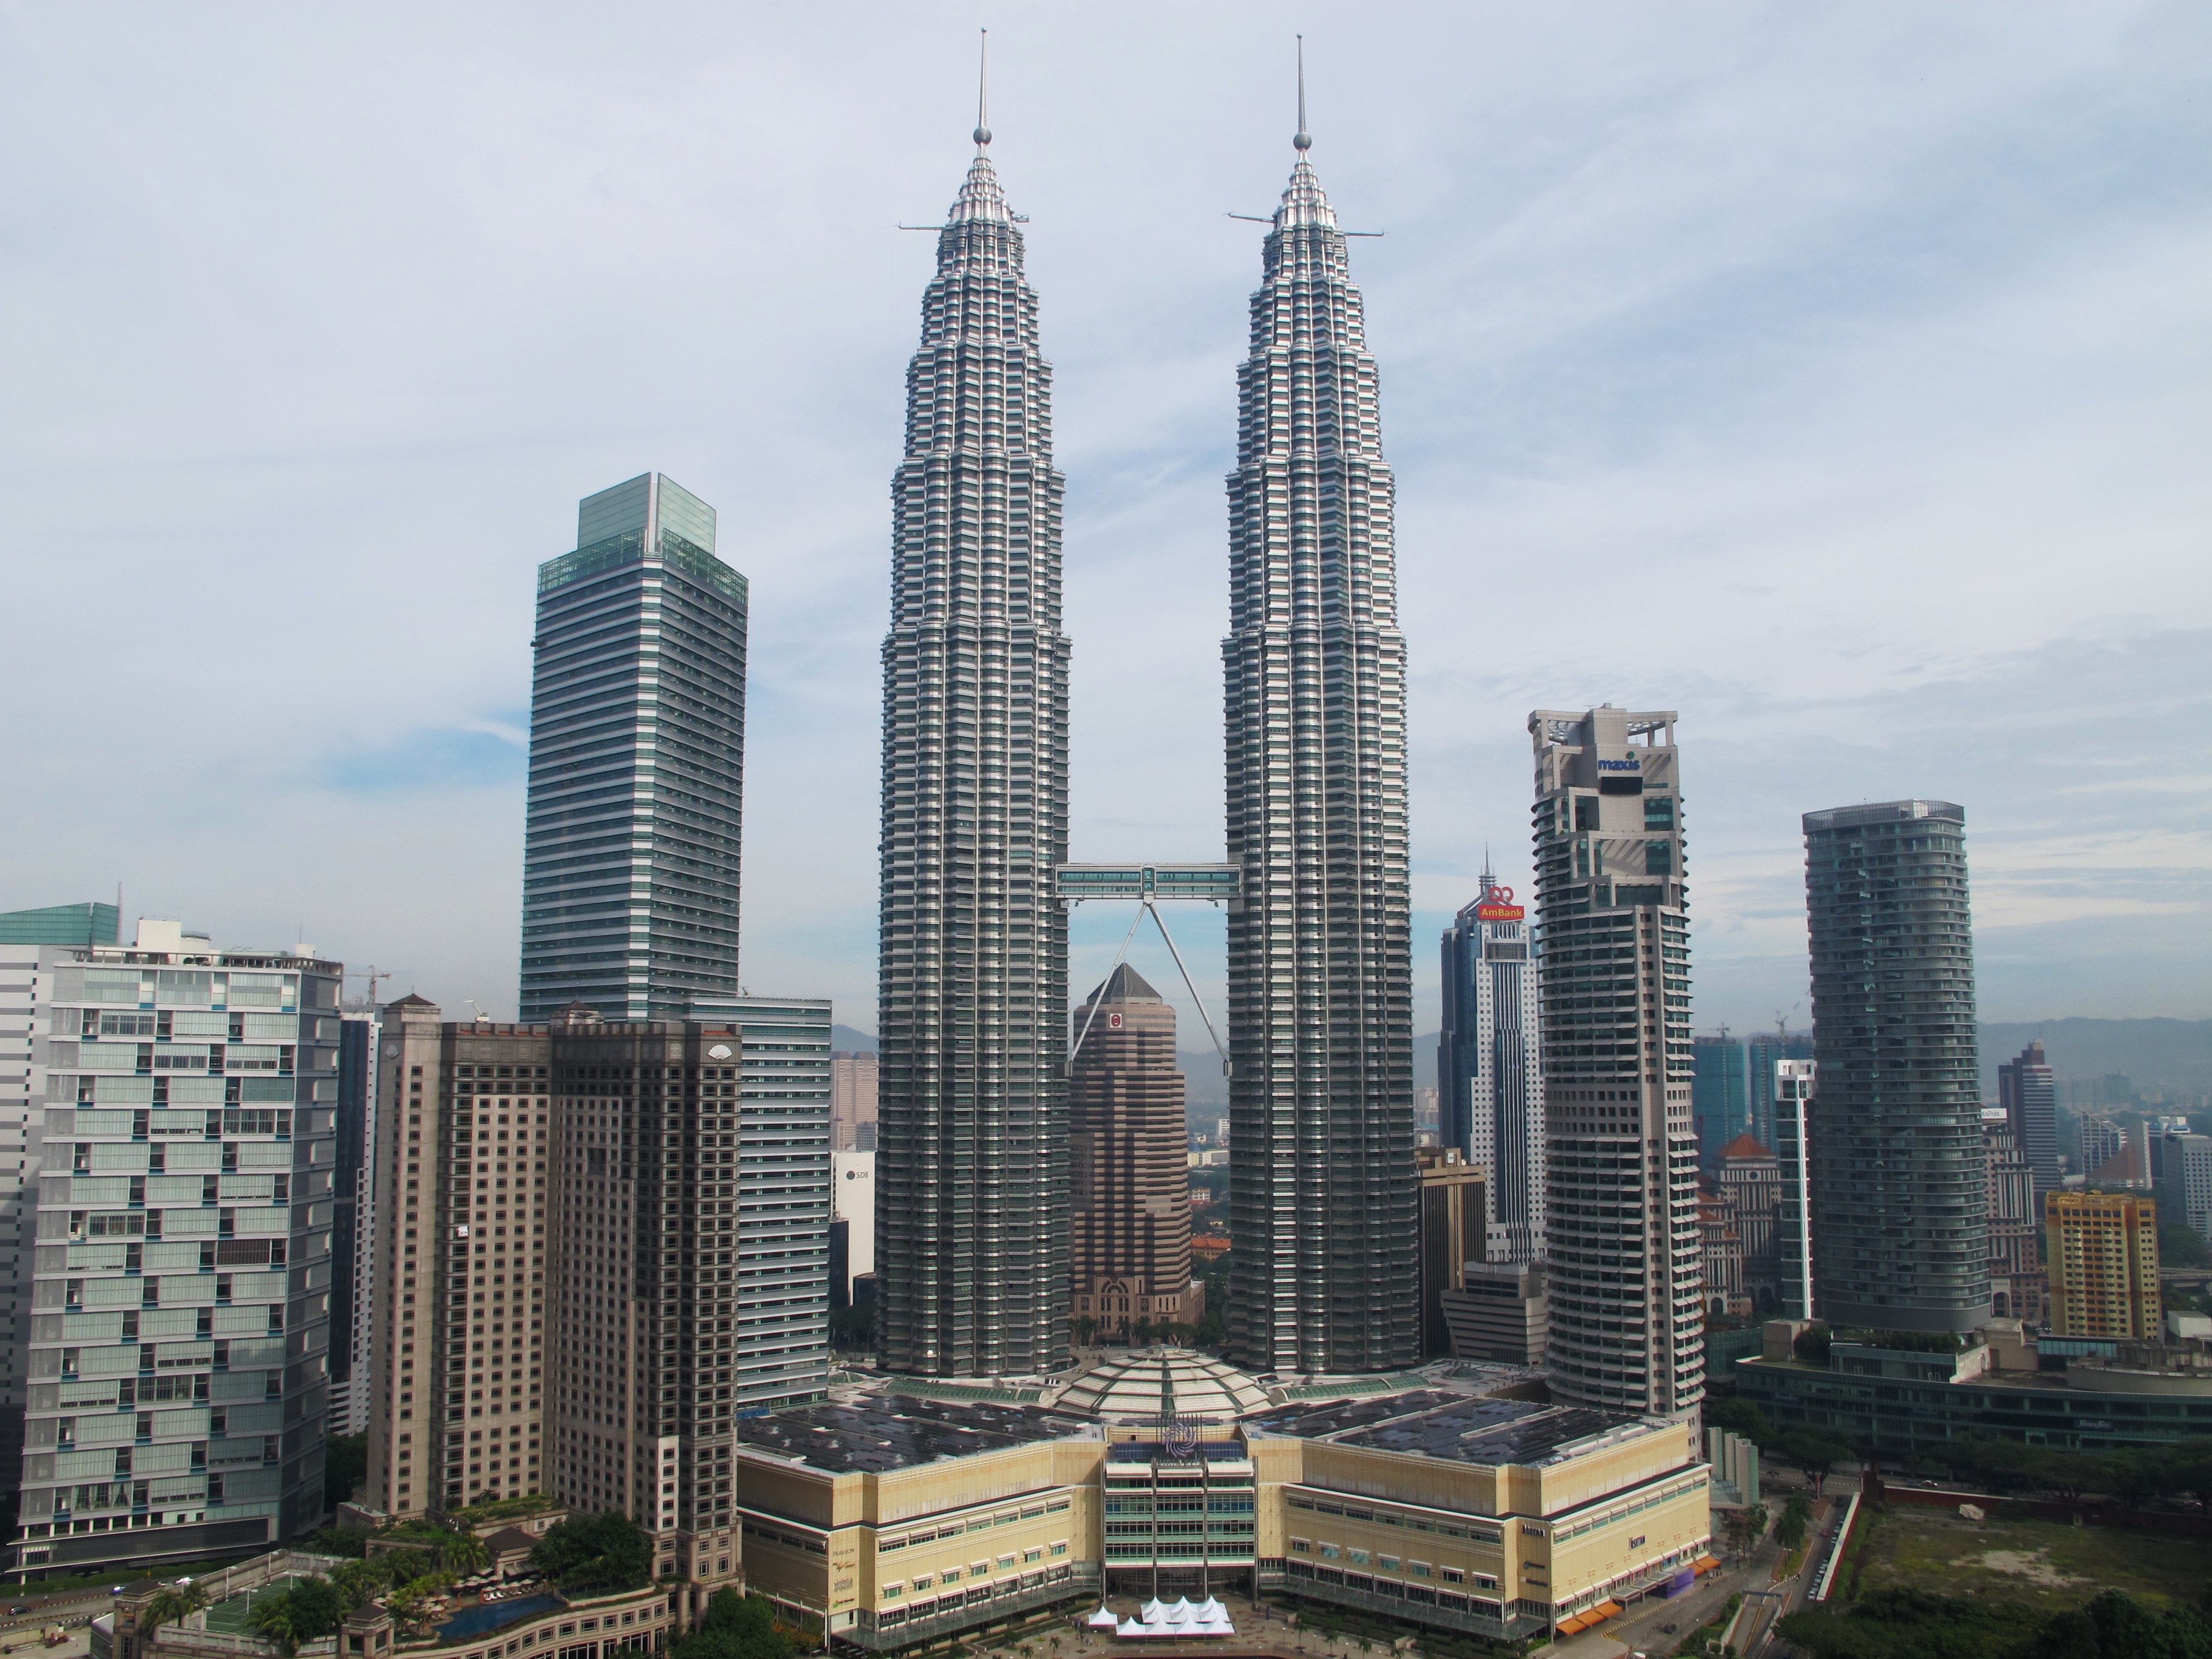 Top attractions must-see when visiting Kuala Lumpur, Malaysia